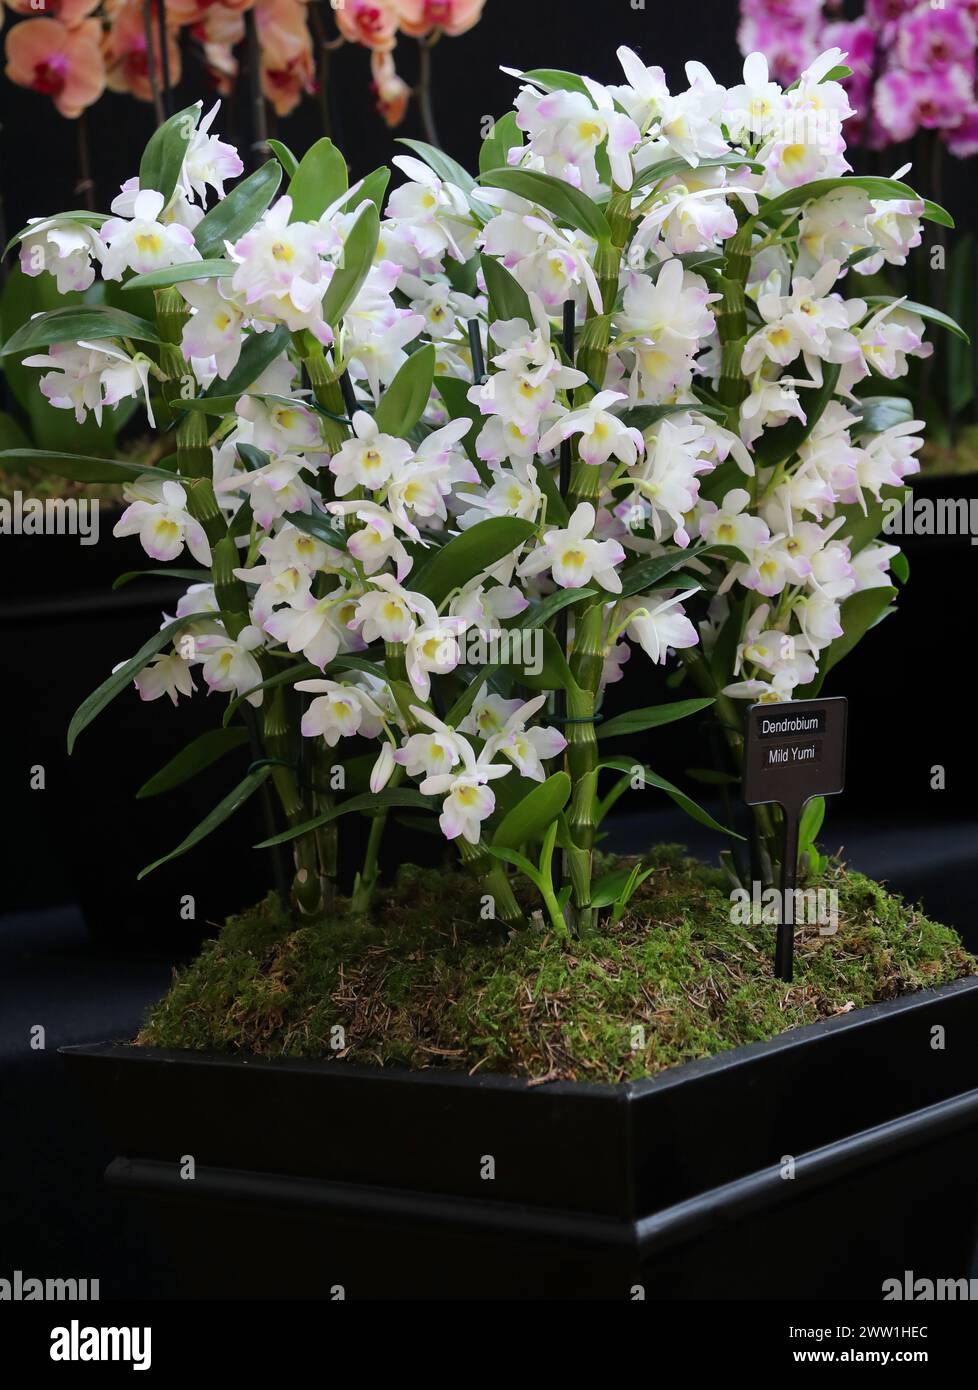 Orchid, Dendrobium Mild Yumi, Dendrobiinae, Orchidaceae. Dendrobium is a genus of mostly epiphytic and lithophytic orchids in the family Orchidaceae. Stock Photo